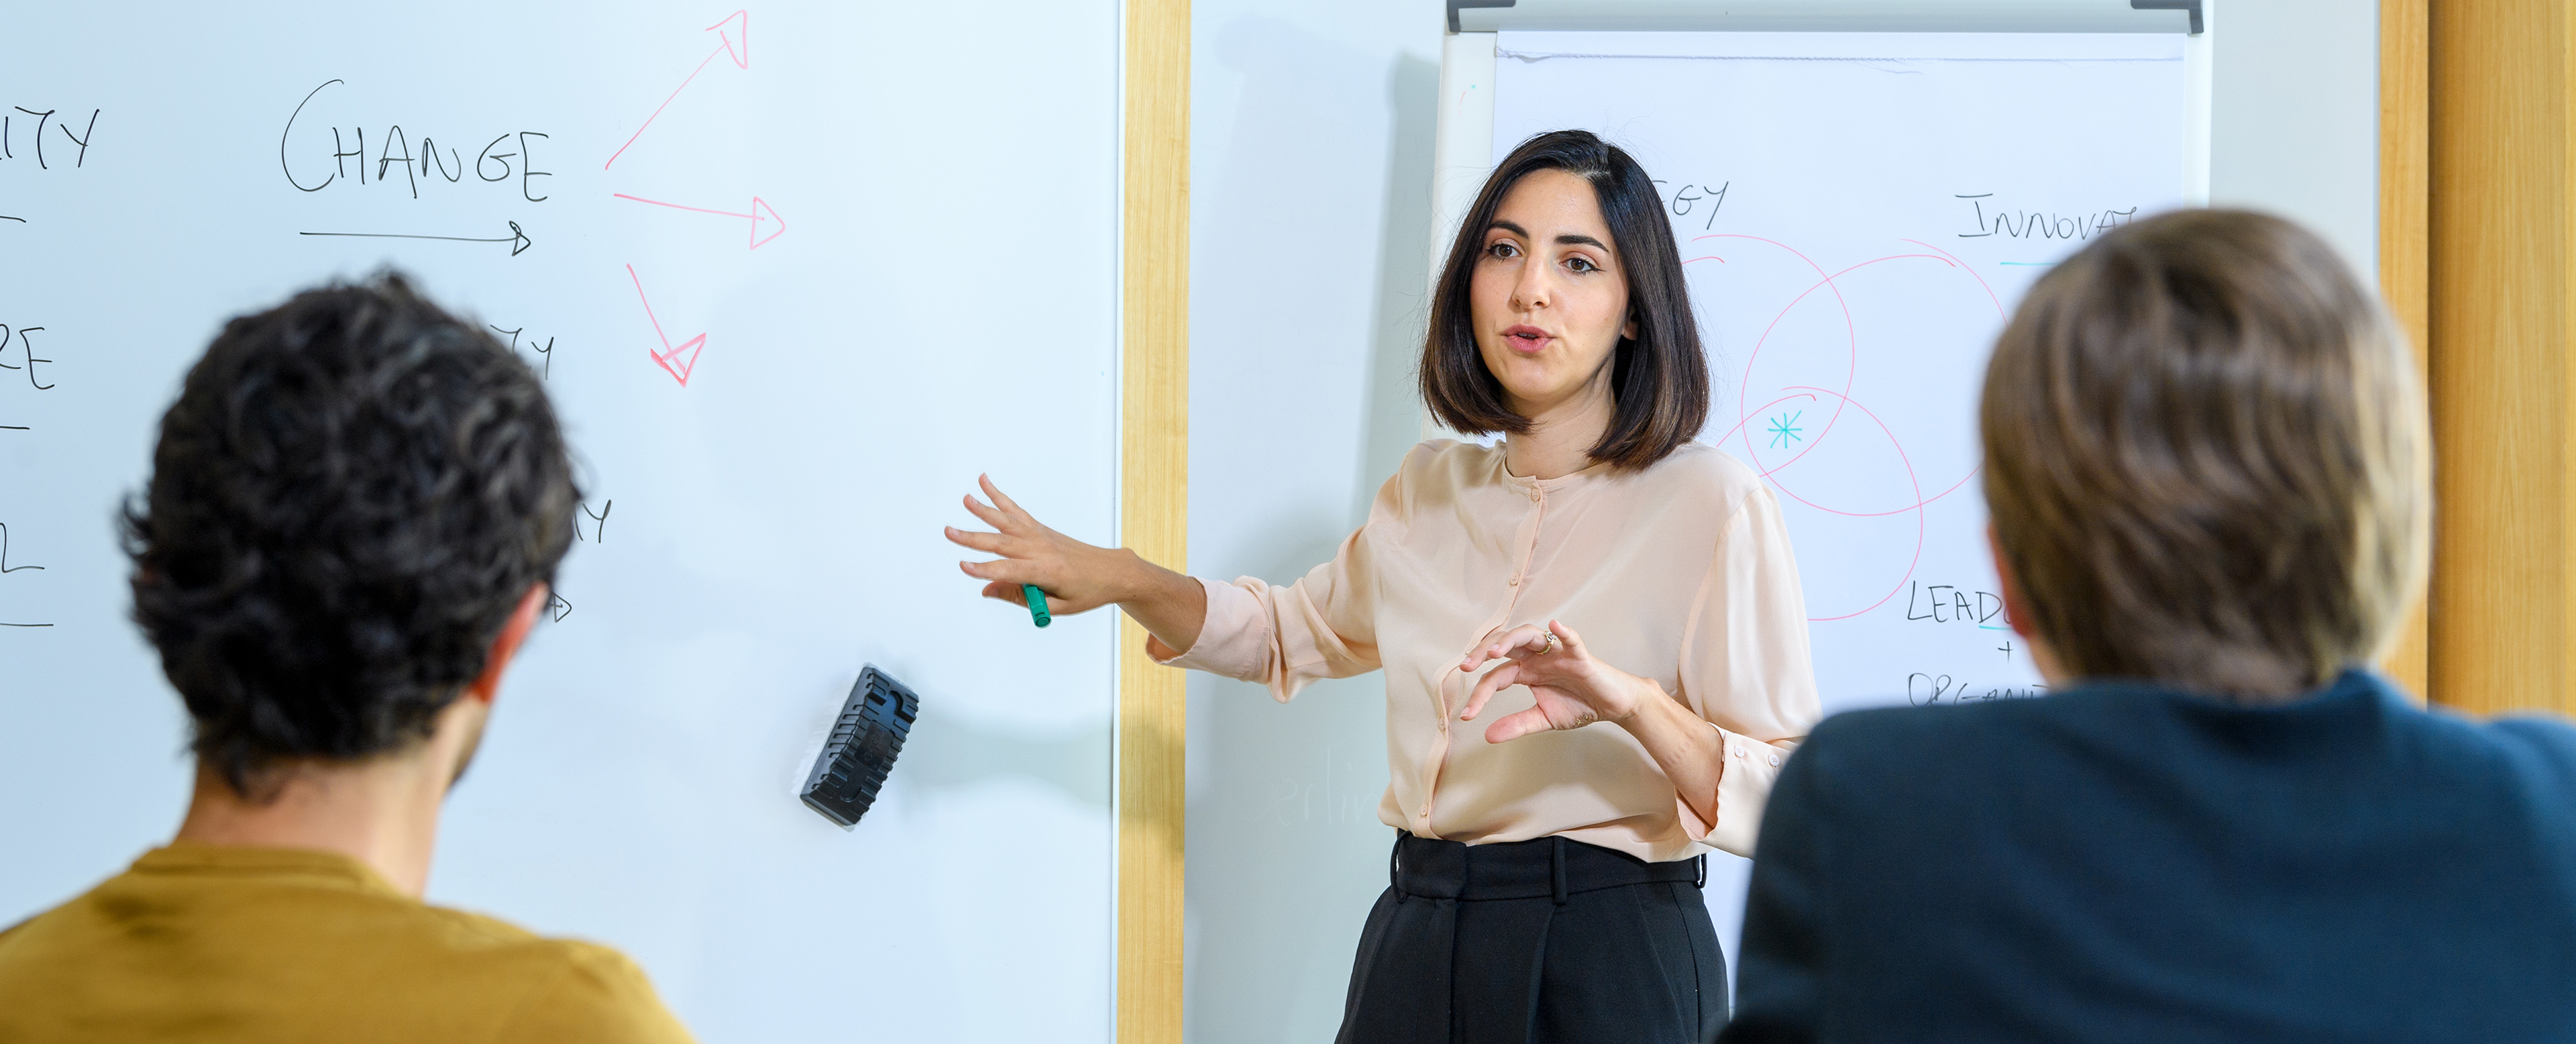 Female professor standing in front of white board teaching students 